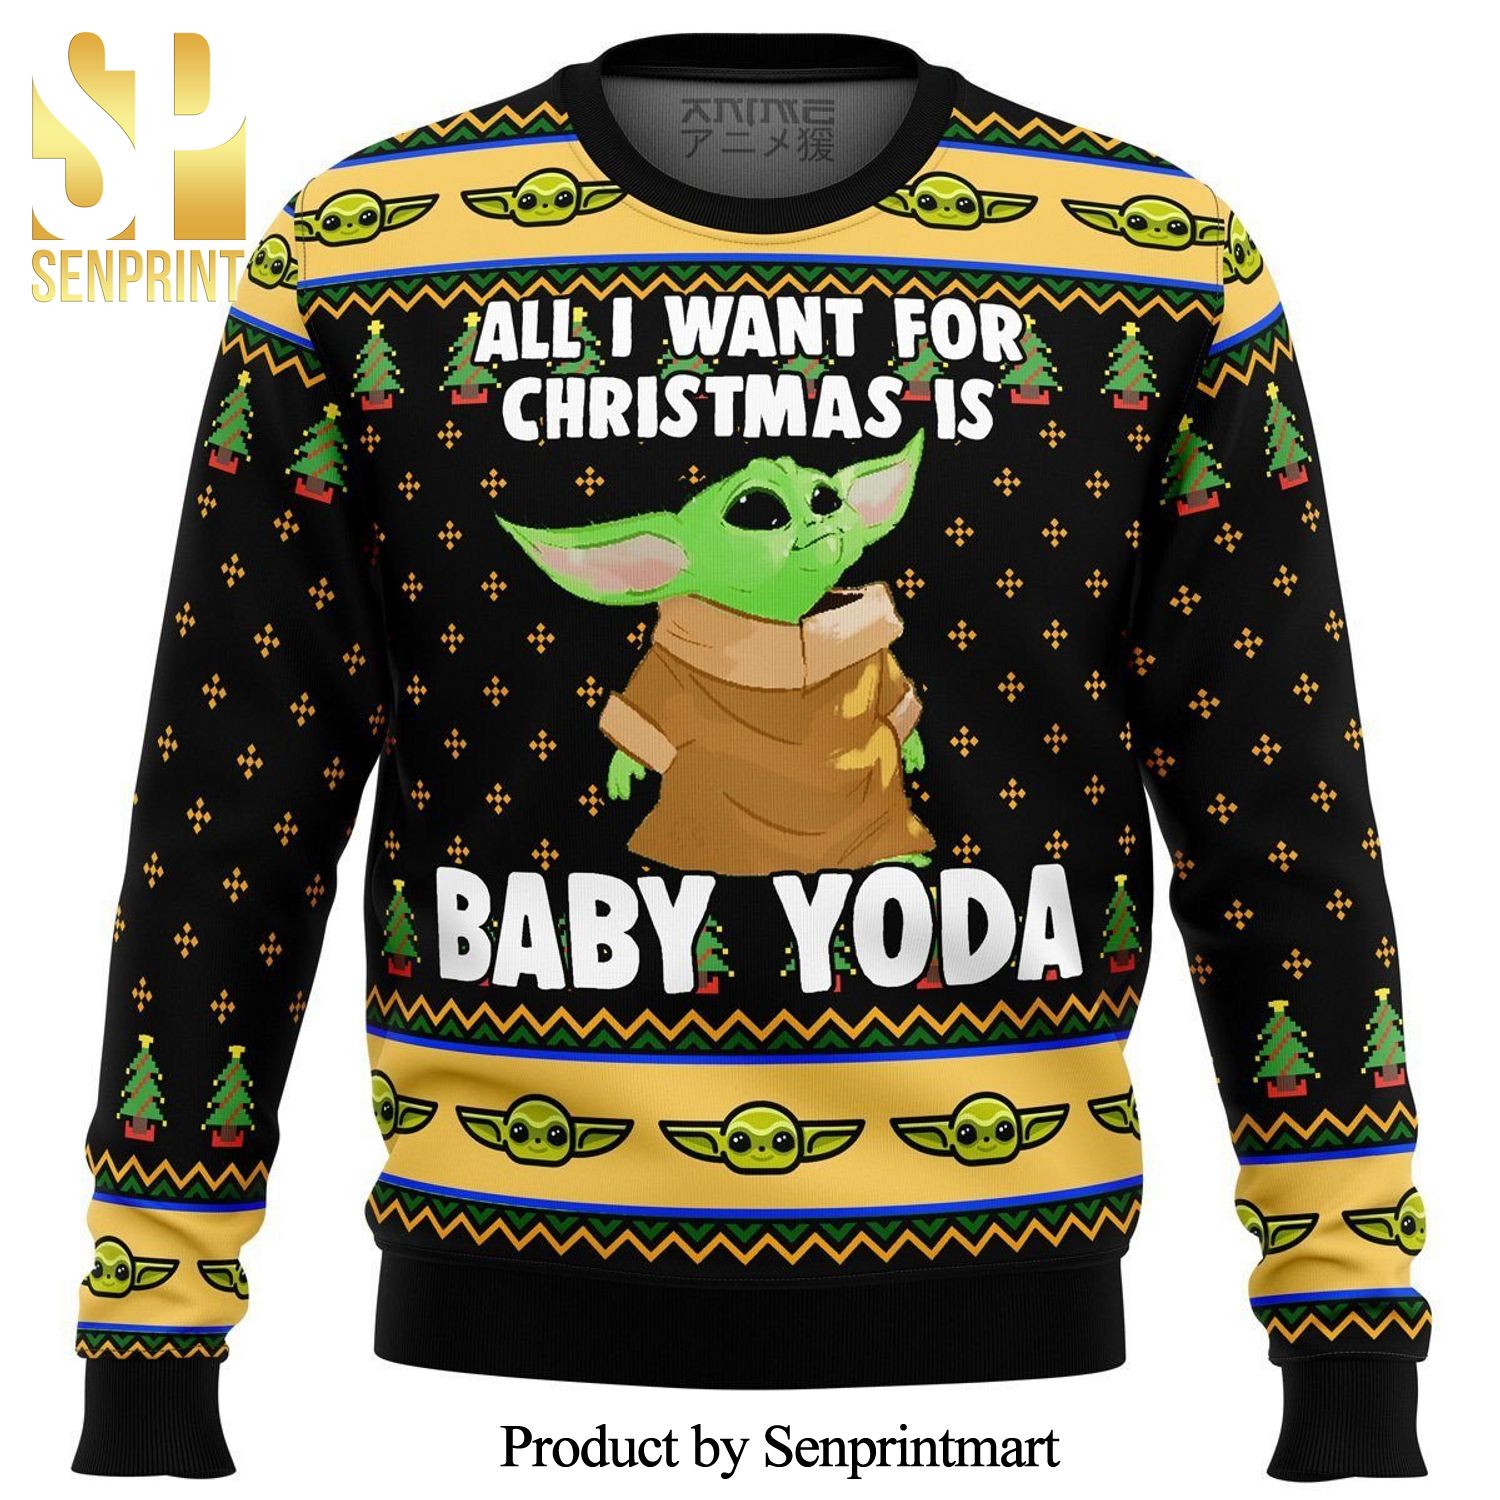 Baby Yoda All I Want Mandalorion Star Wars Premium Knitted Ugly Christmas Sweater